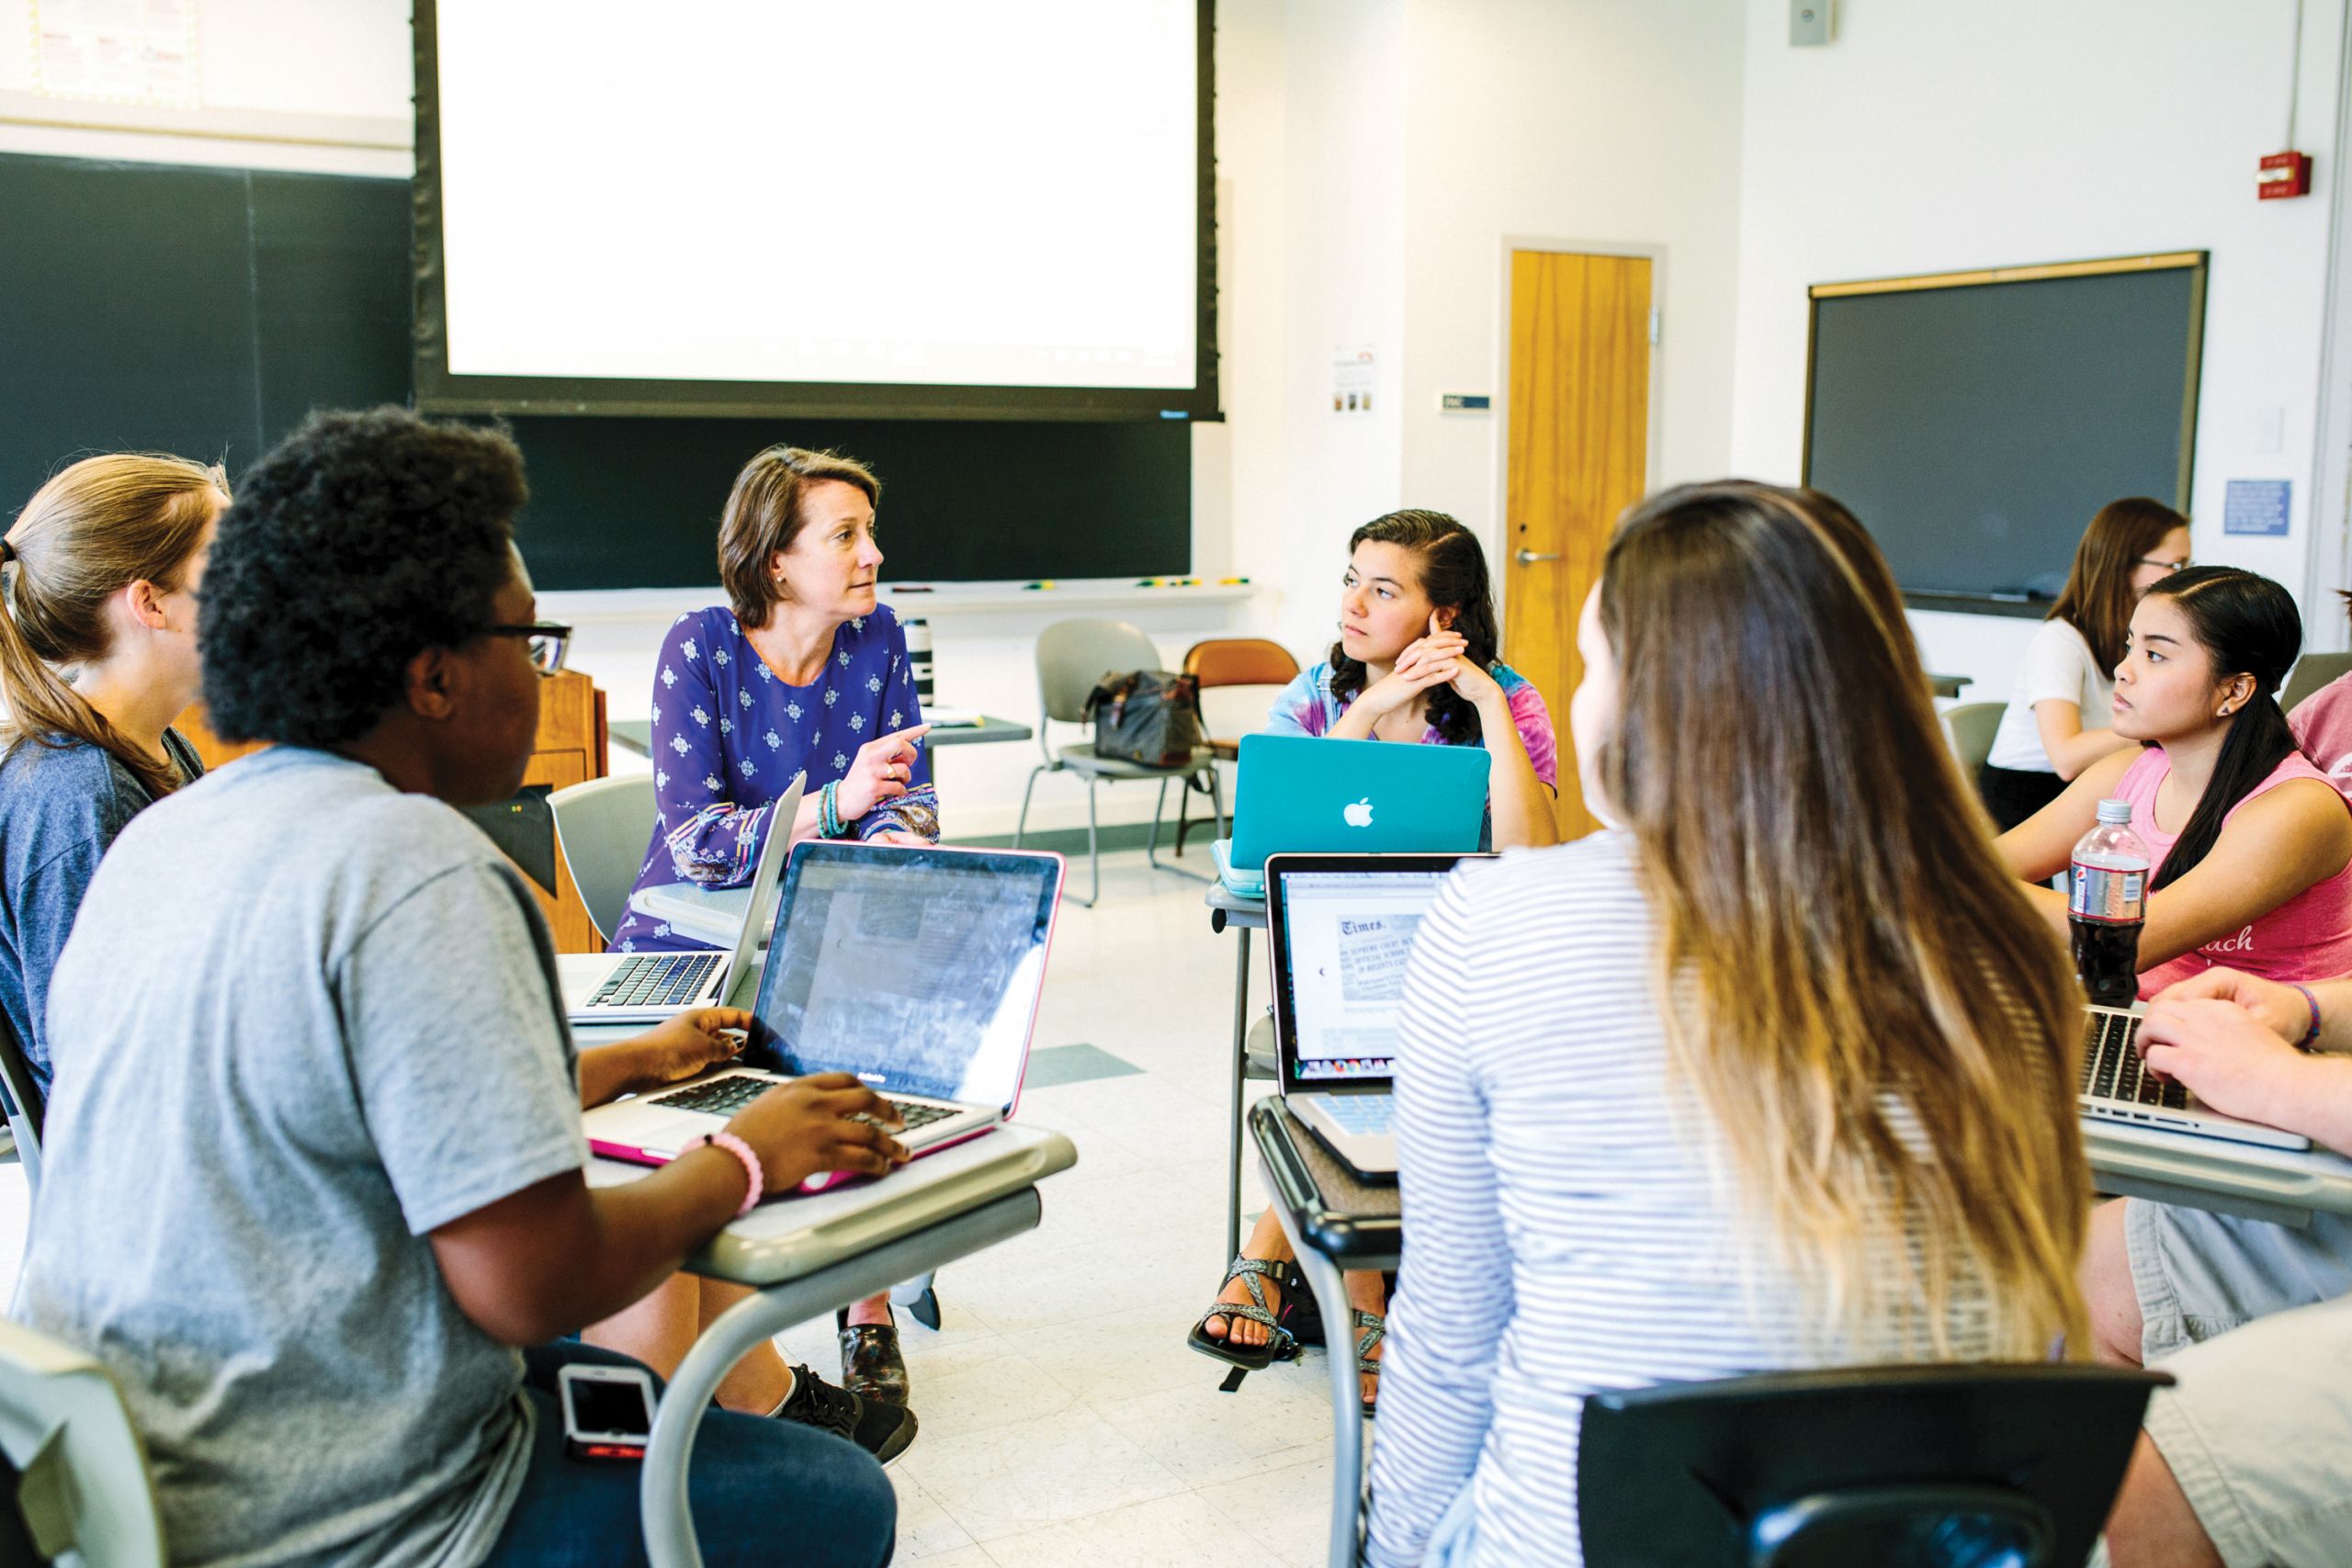 Assistant Professor Cheryl Bolick works with students